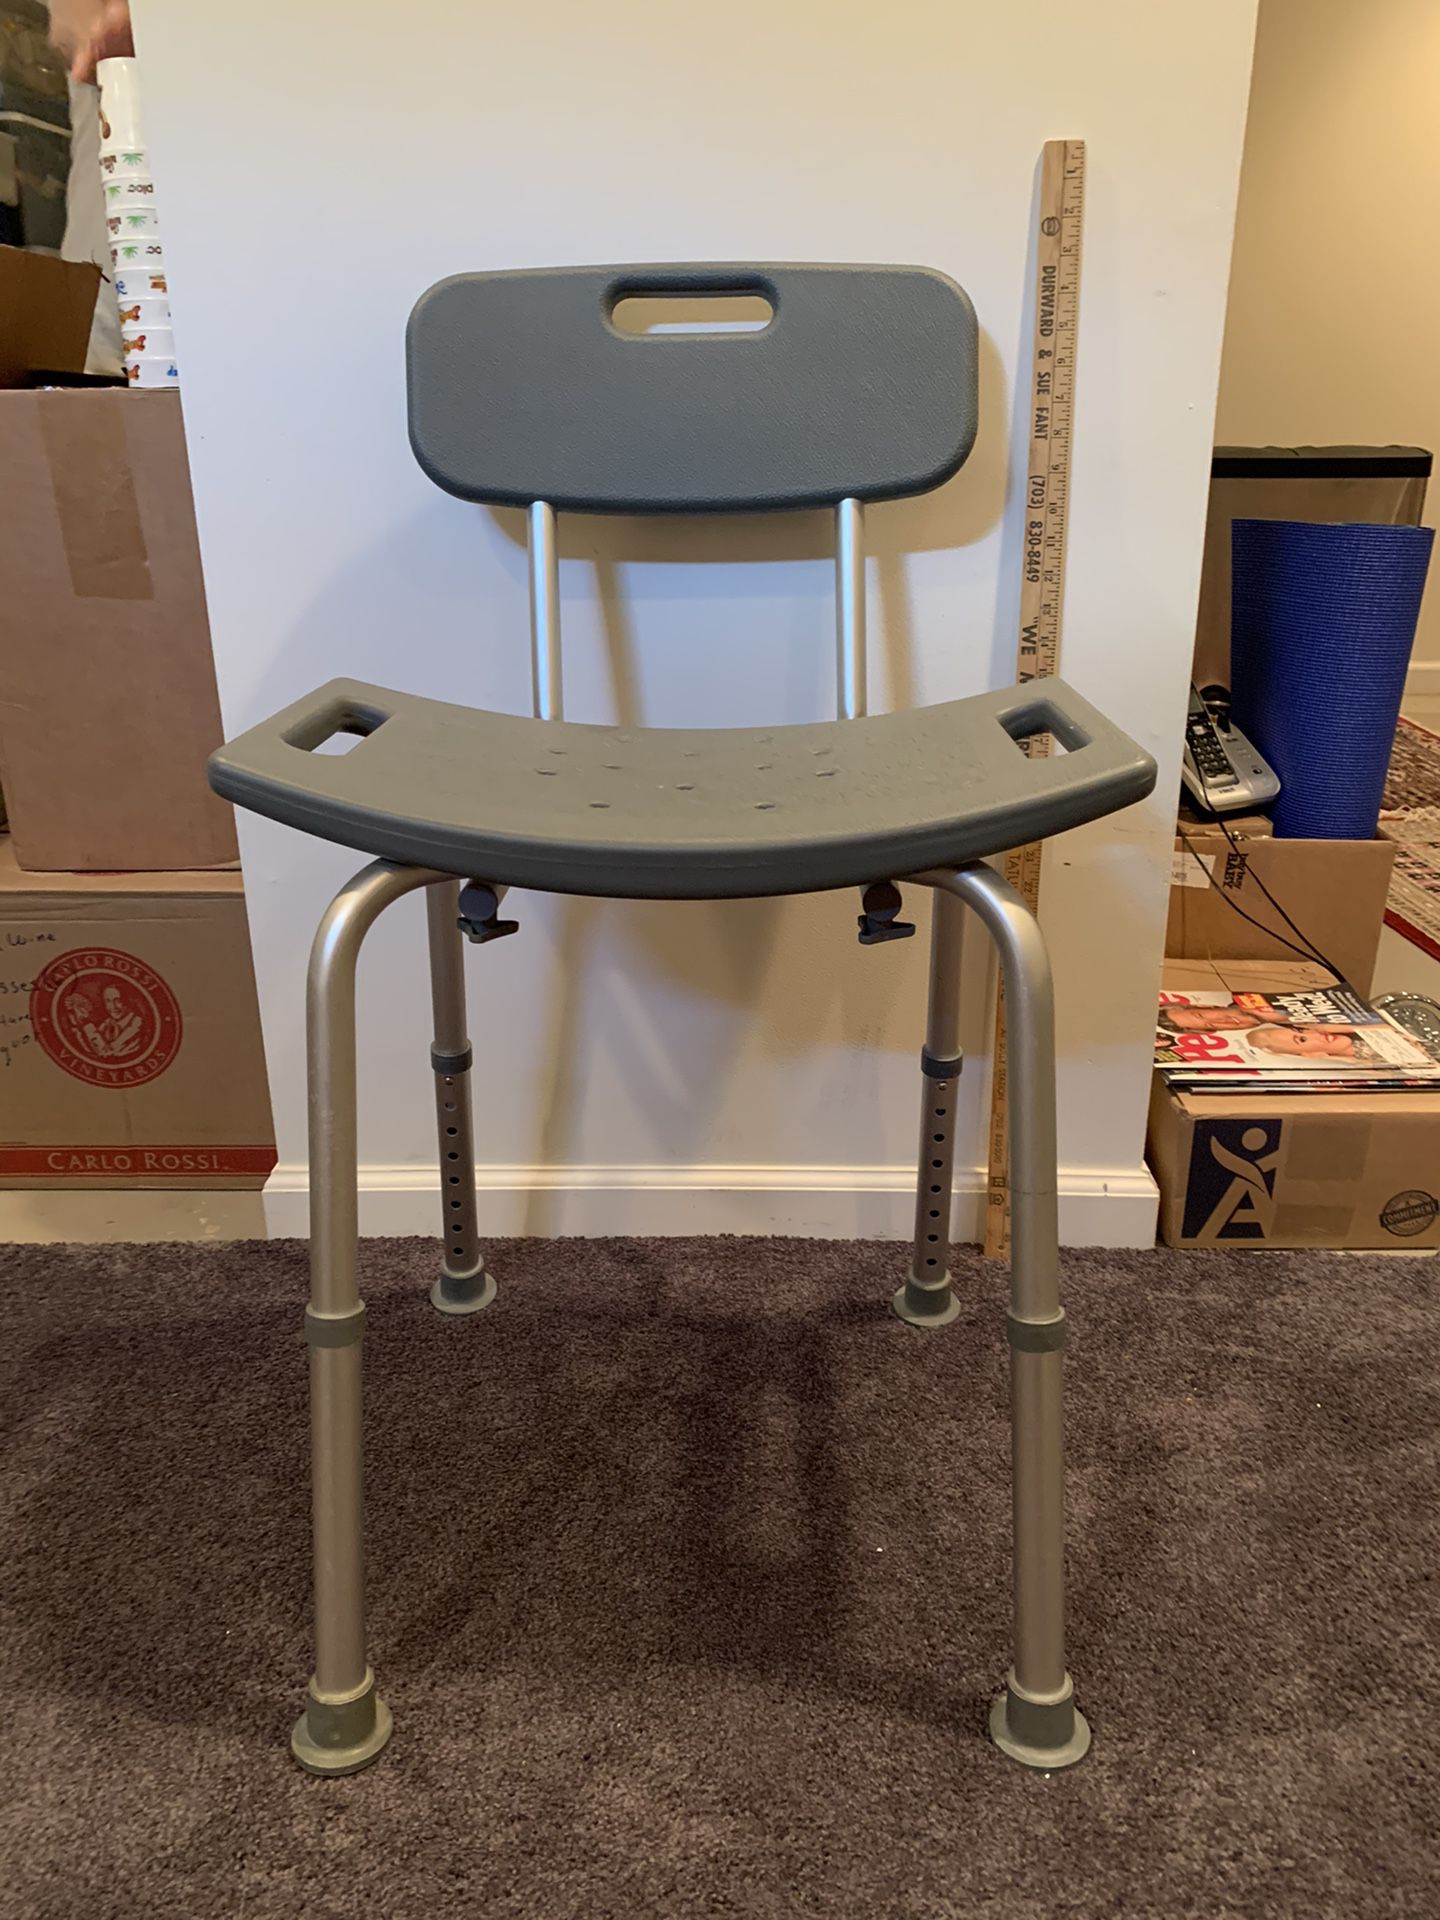 Aluminum bath/shower chair with back